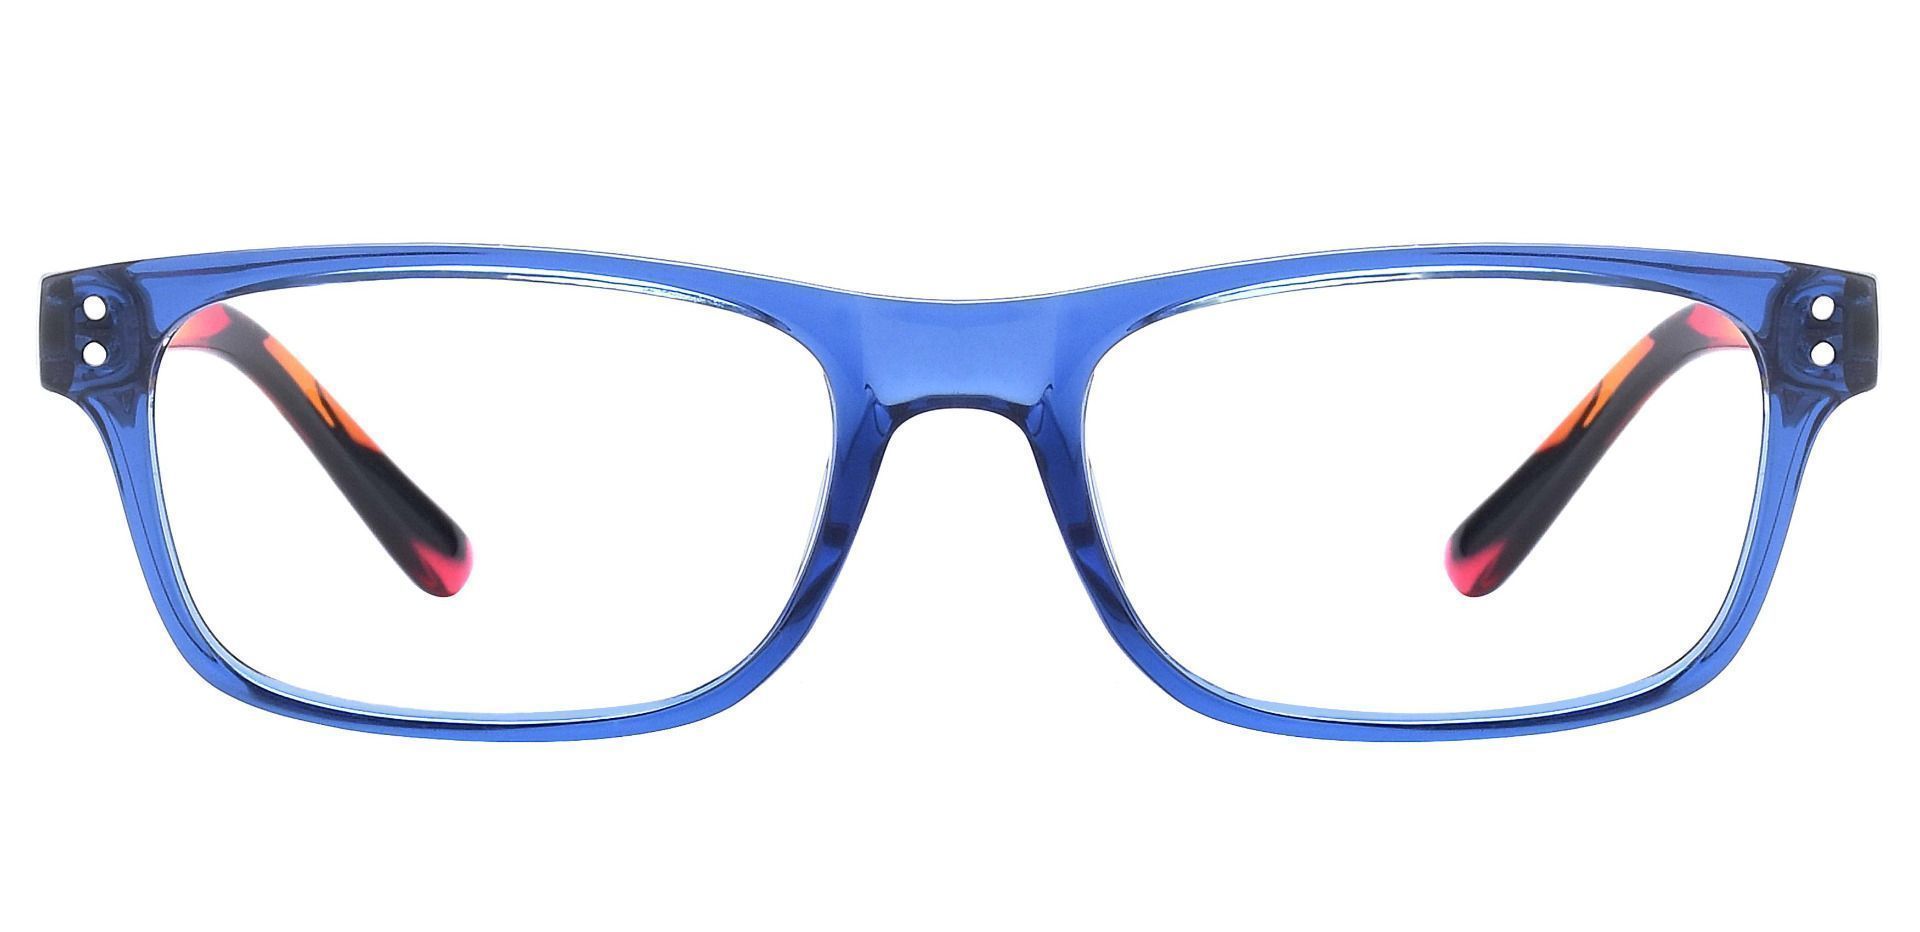 Aura Rectangle Reading Glasses - The Frame Id Blue And Floral